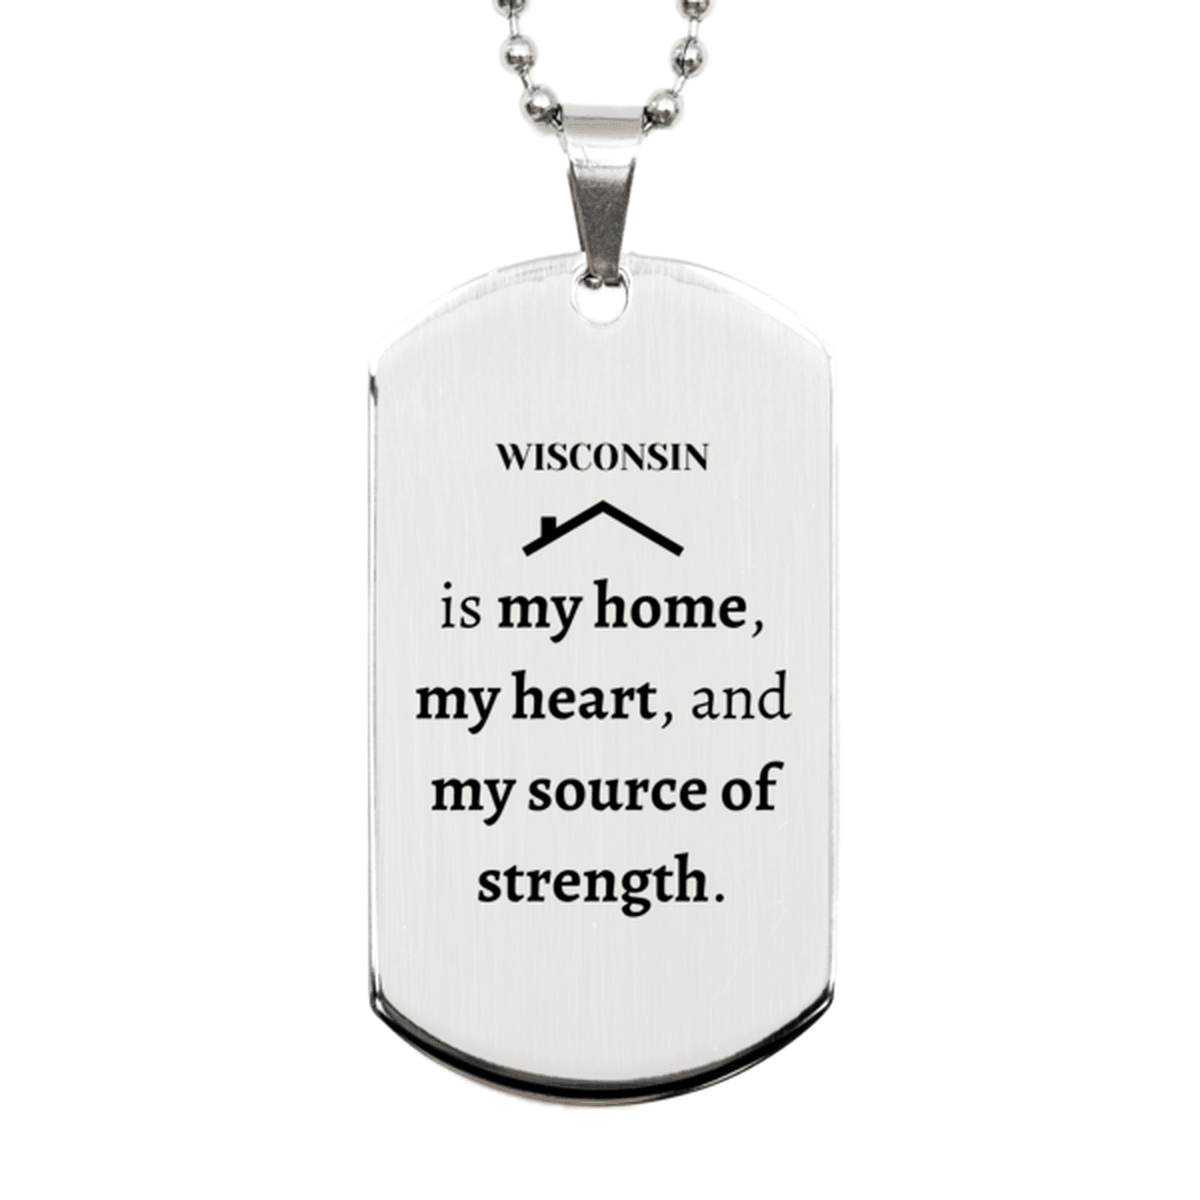 Wisconsin is my home Gifts, Lovely Wisconsin Birthday Christmas Silver Dog Tag For People from Wisconsin, Men, Women, Friends - Mallard Moon Gift Shop